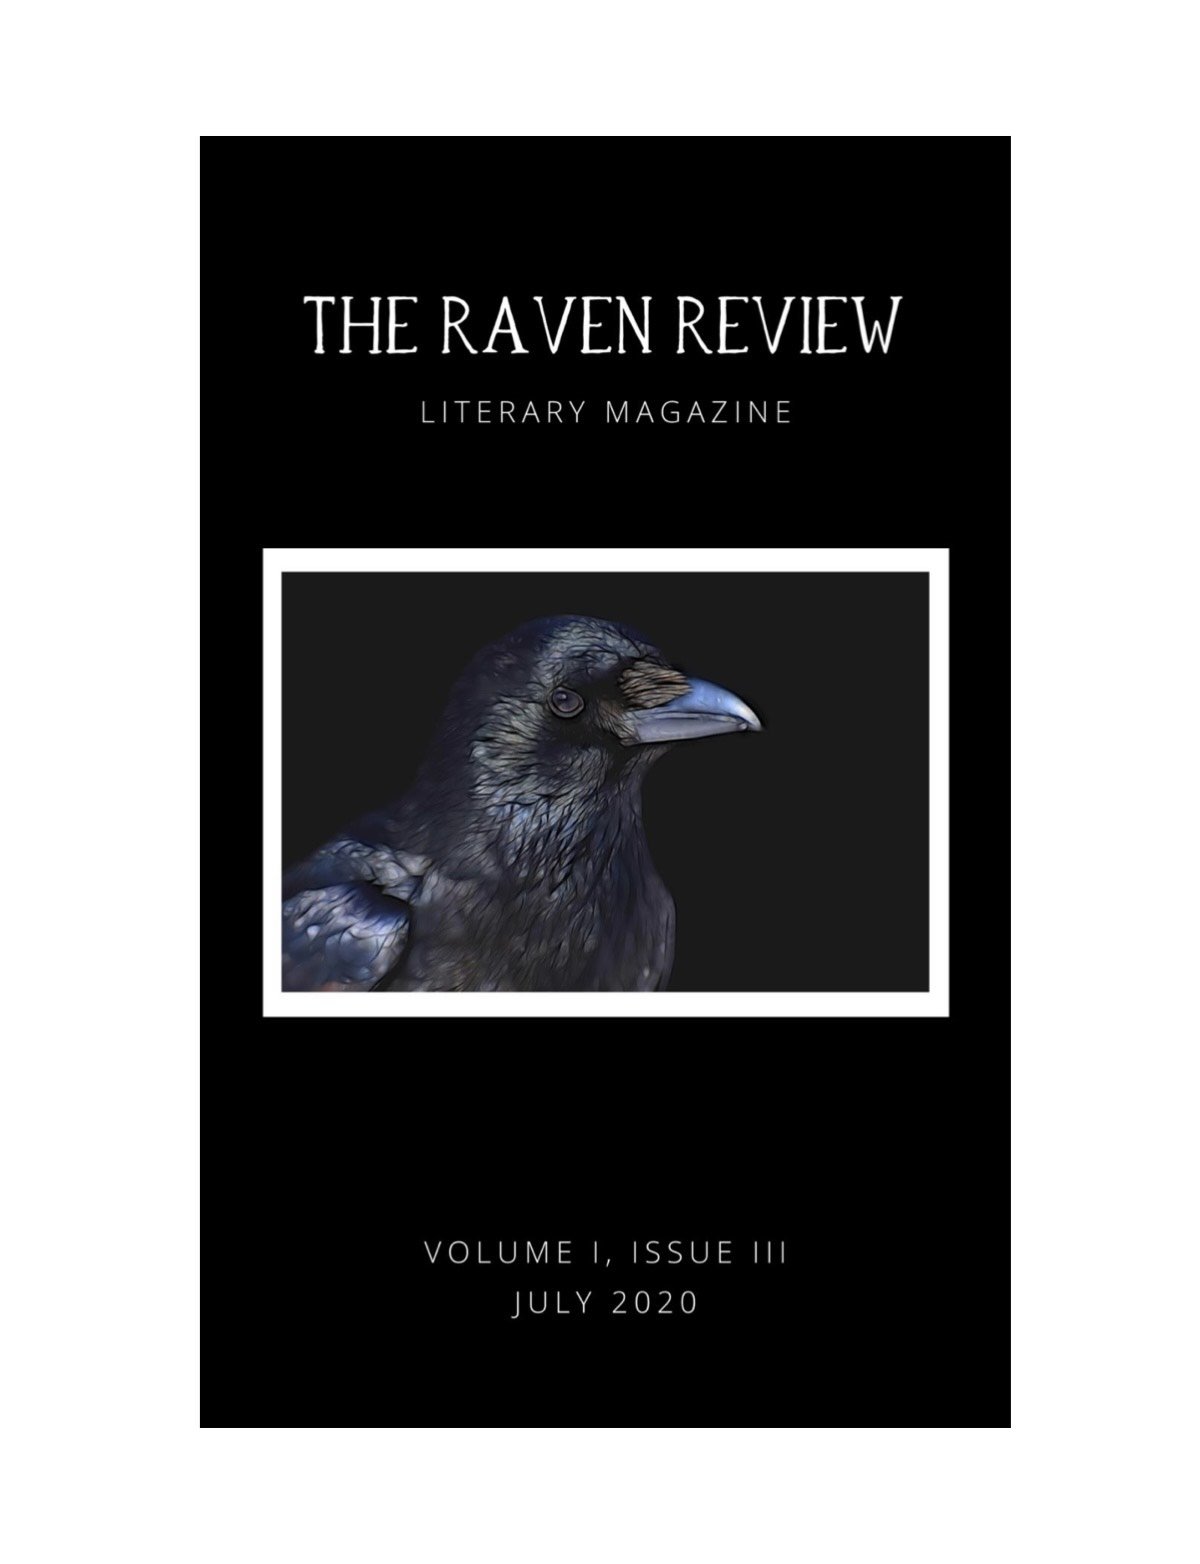 Raven Review July 2020 Cover.JPG